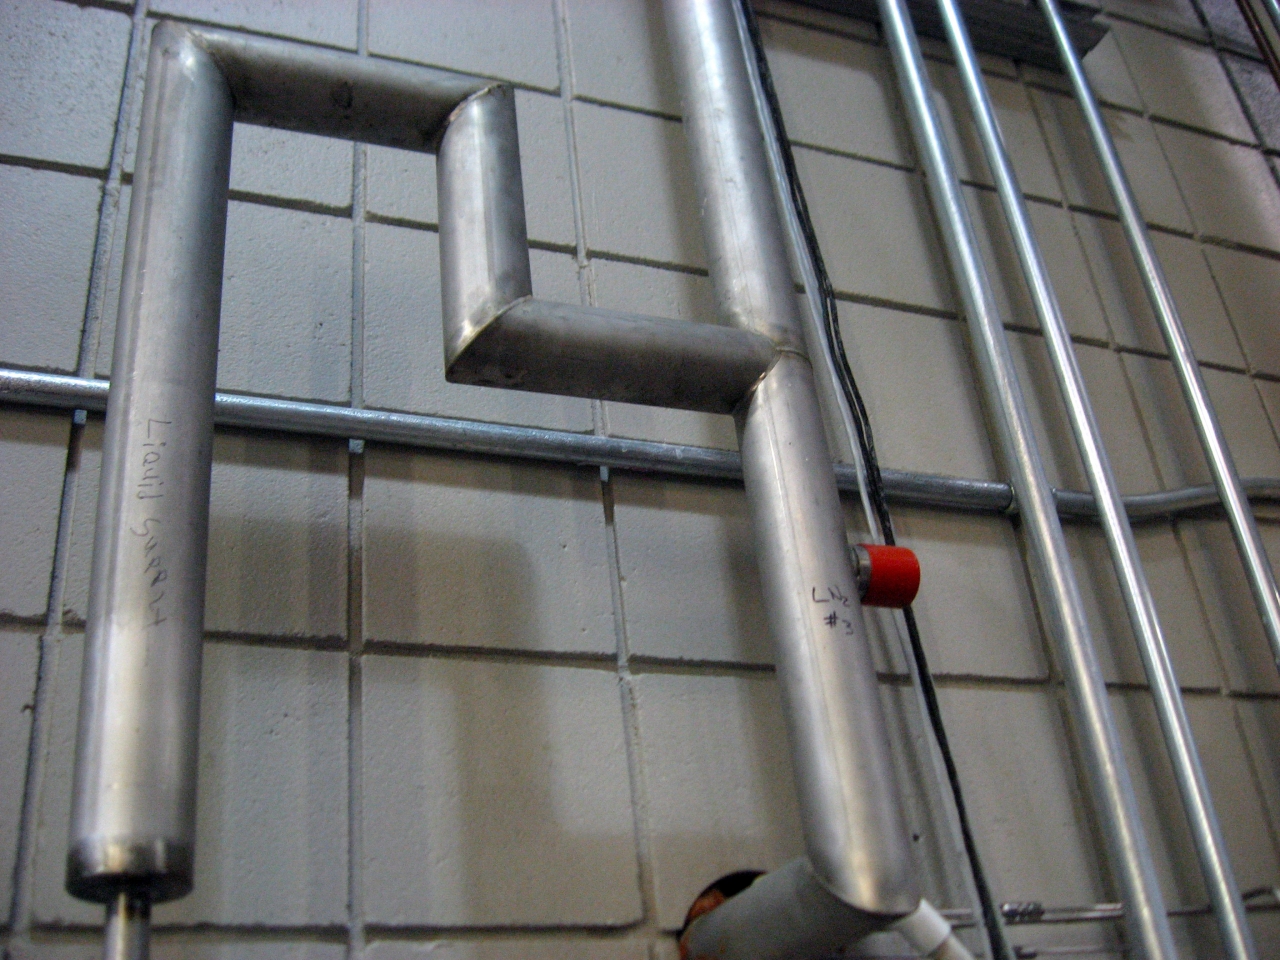 Liquid supply conduit in the DC Field wing test cell corridor.